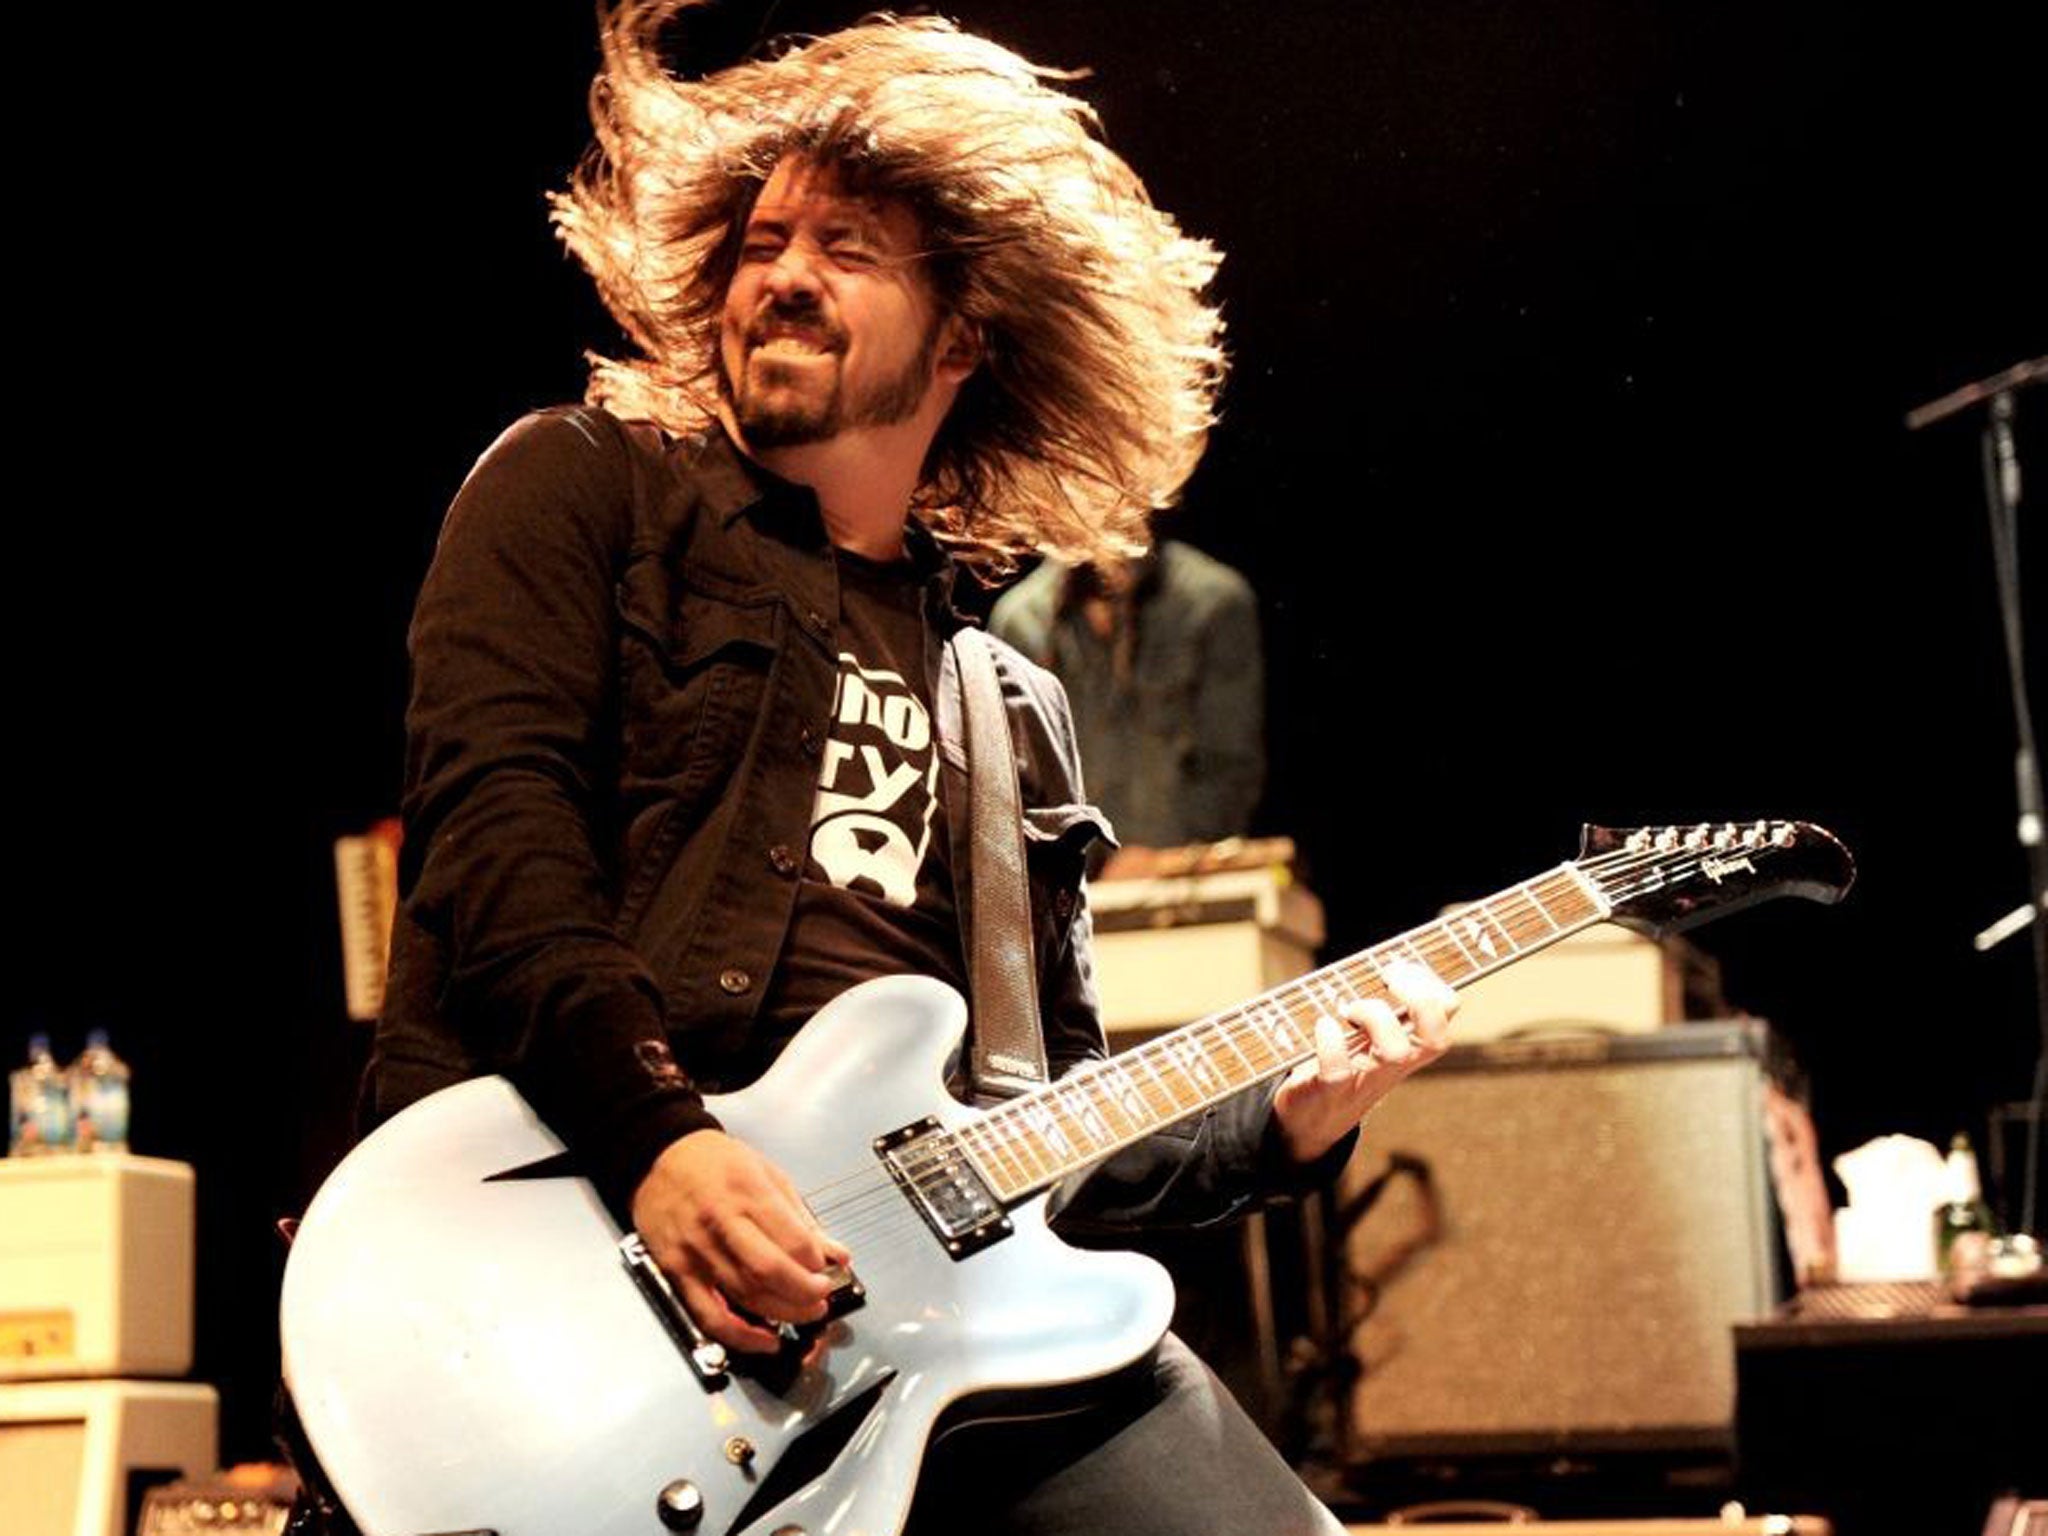 Dave Grohl, Foo Fighters frontman